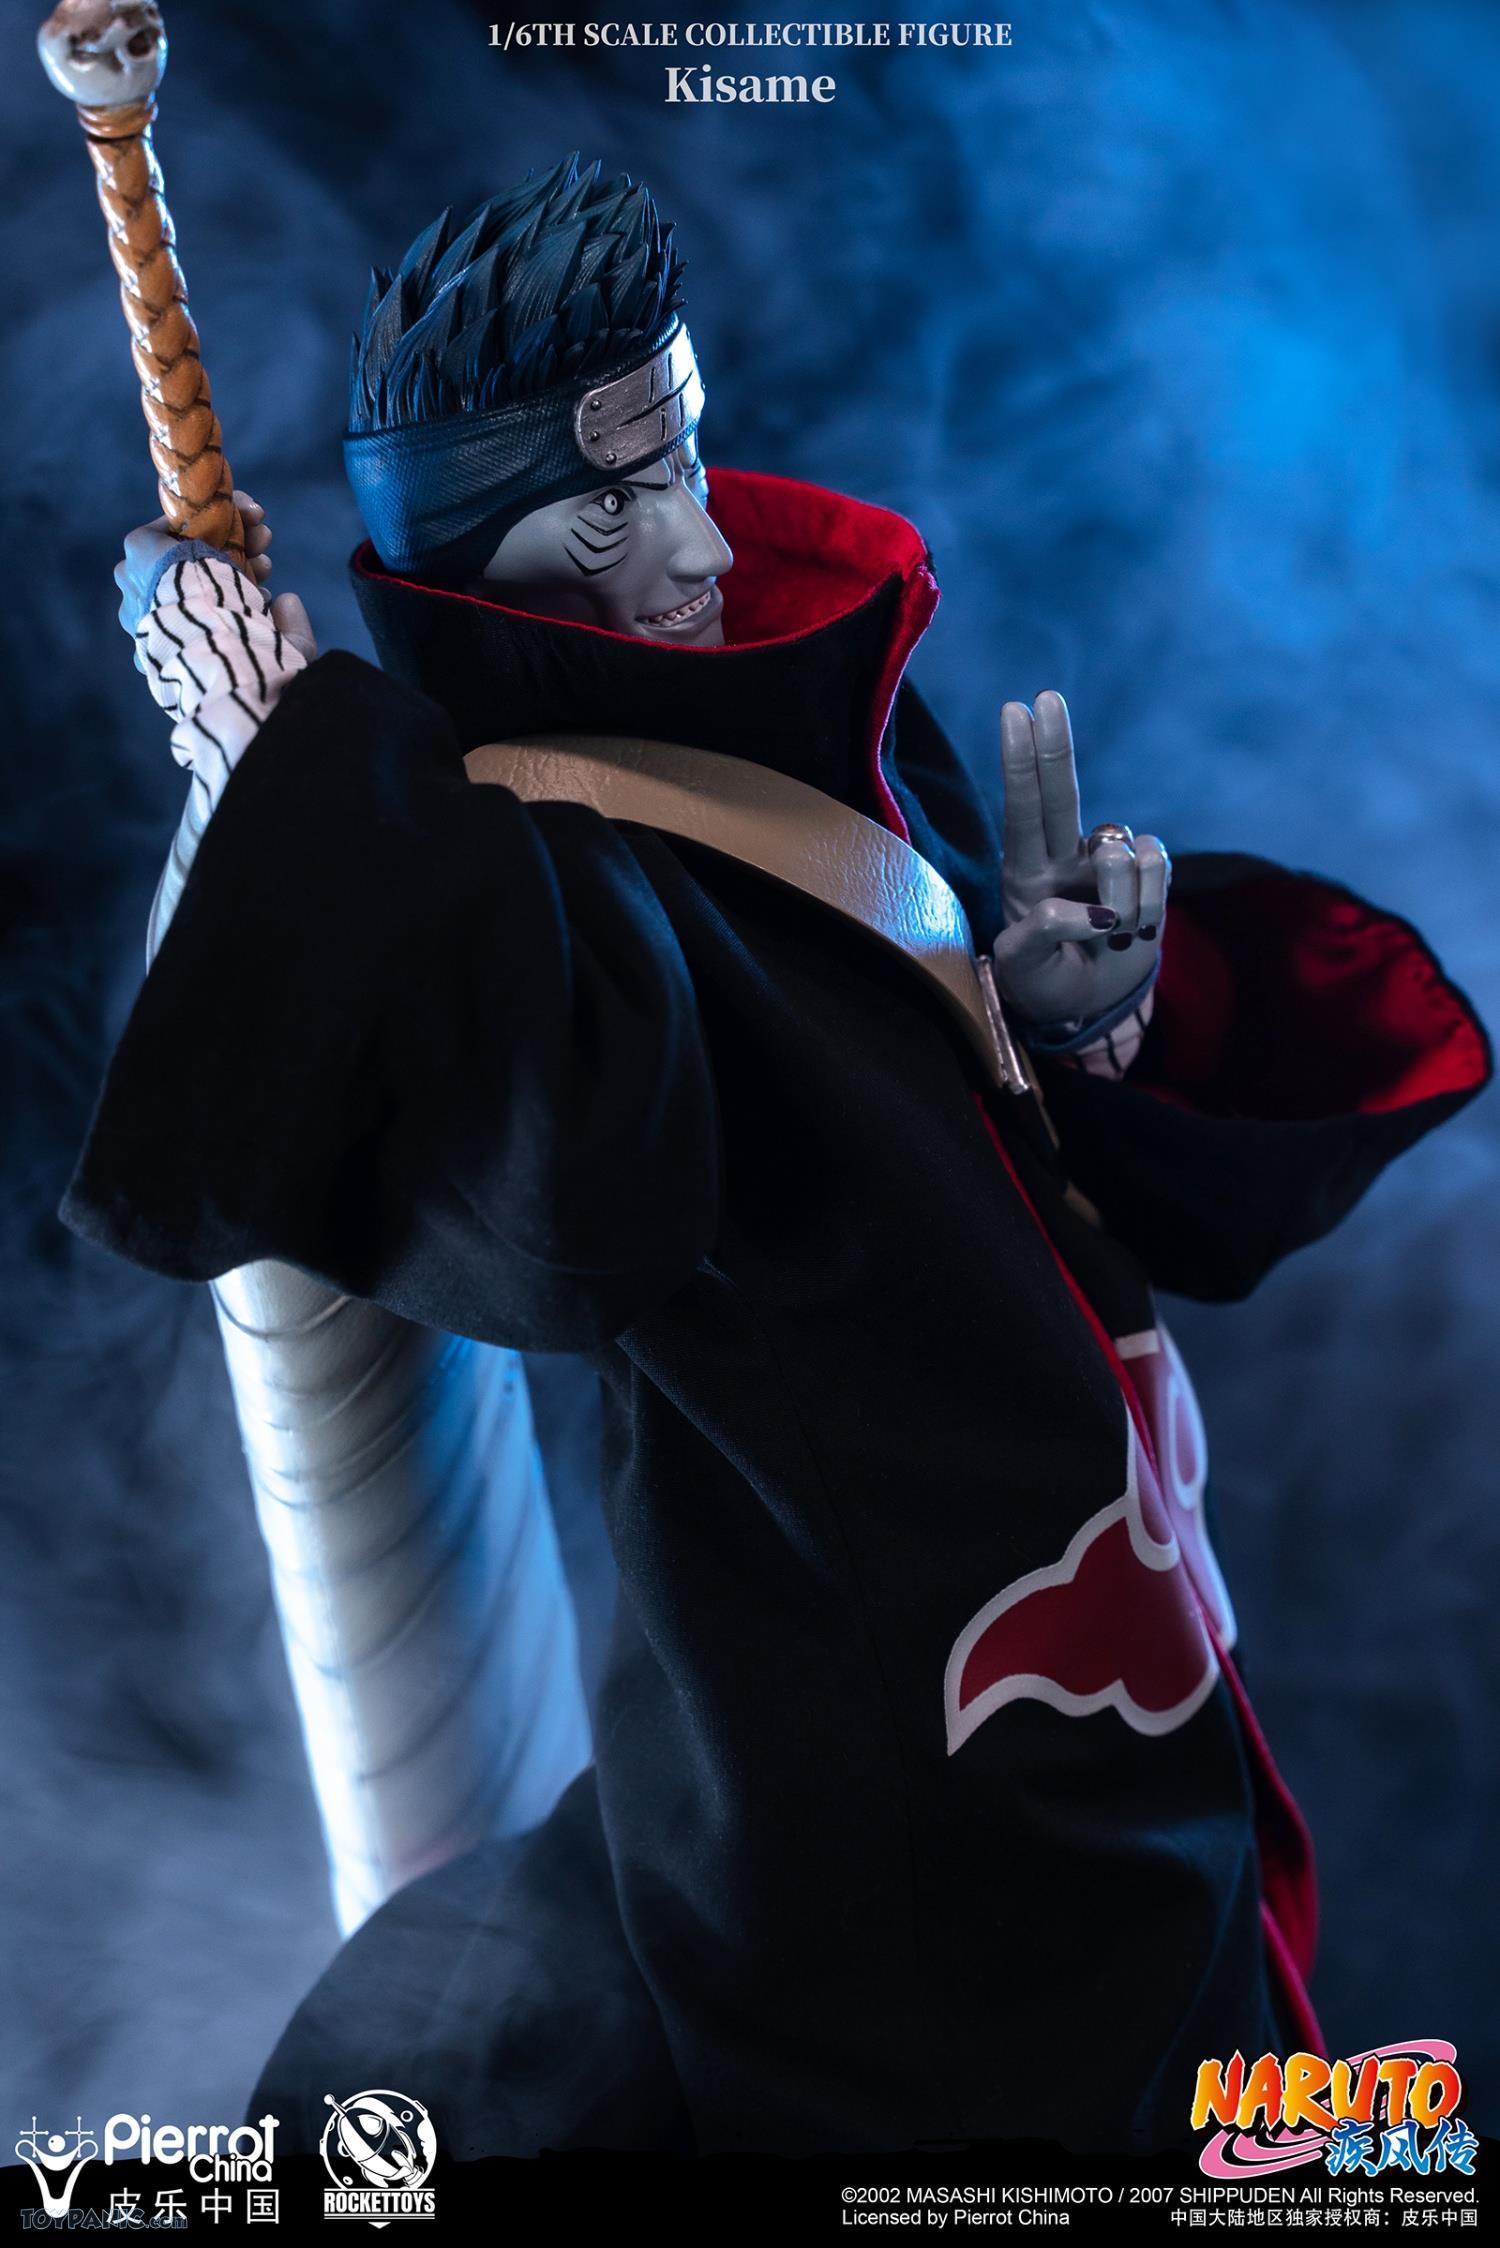 NEW PRODUCT: Rocket Toys ROC-007 1/6 Scale Kisame 221202460436PM_37297